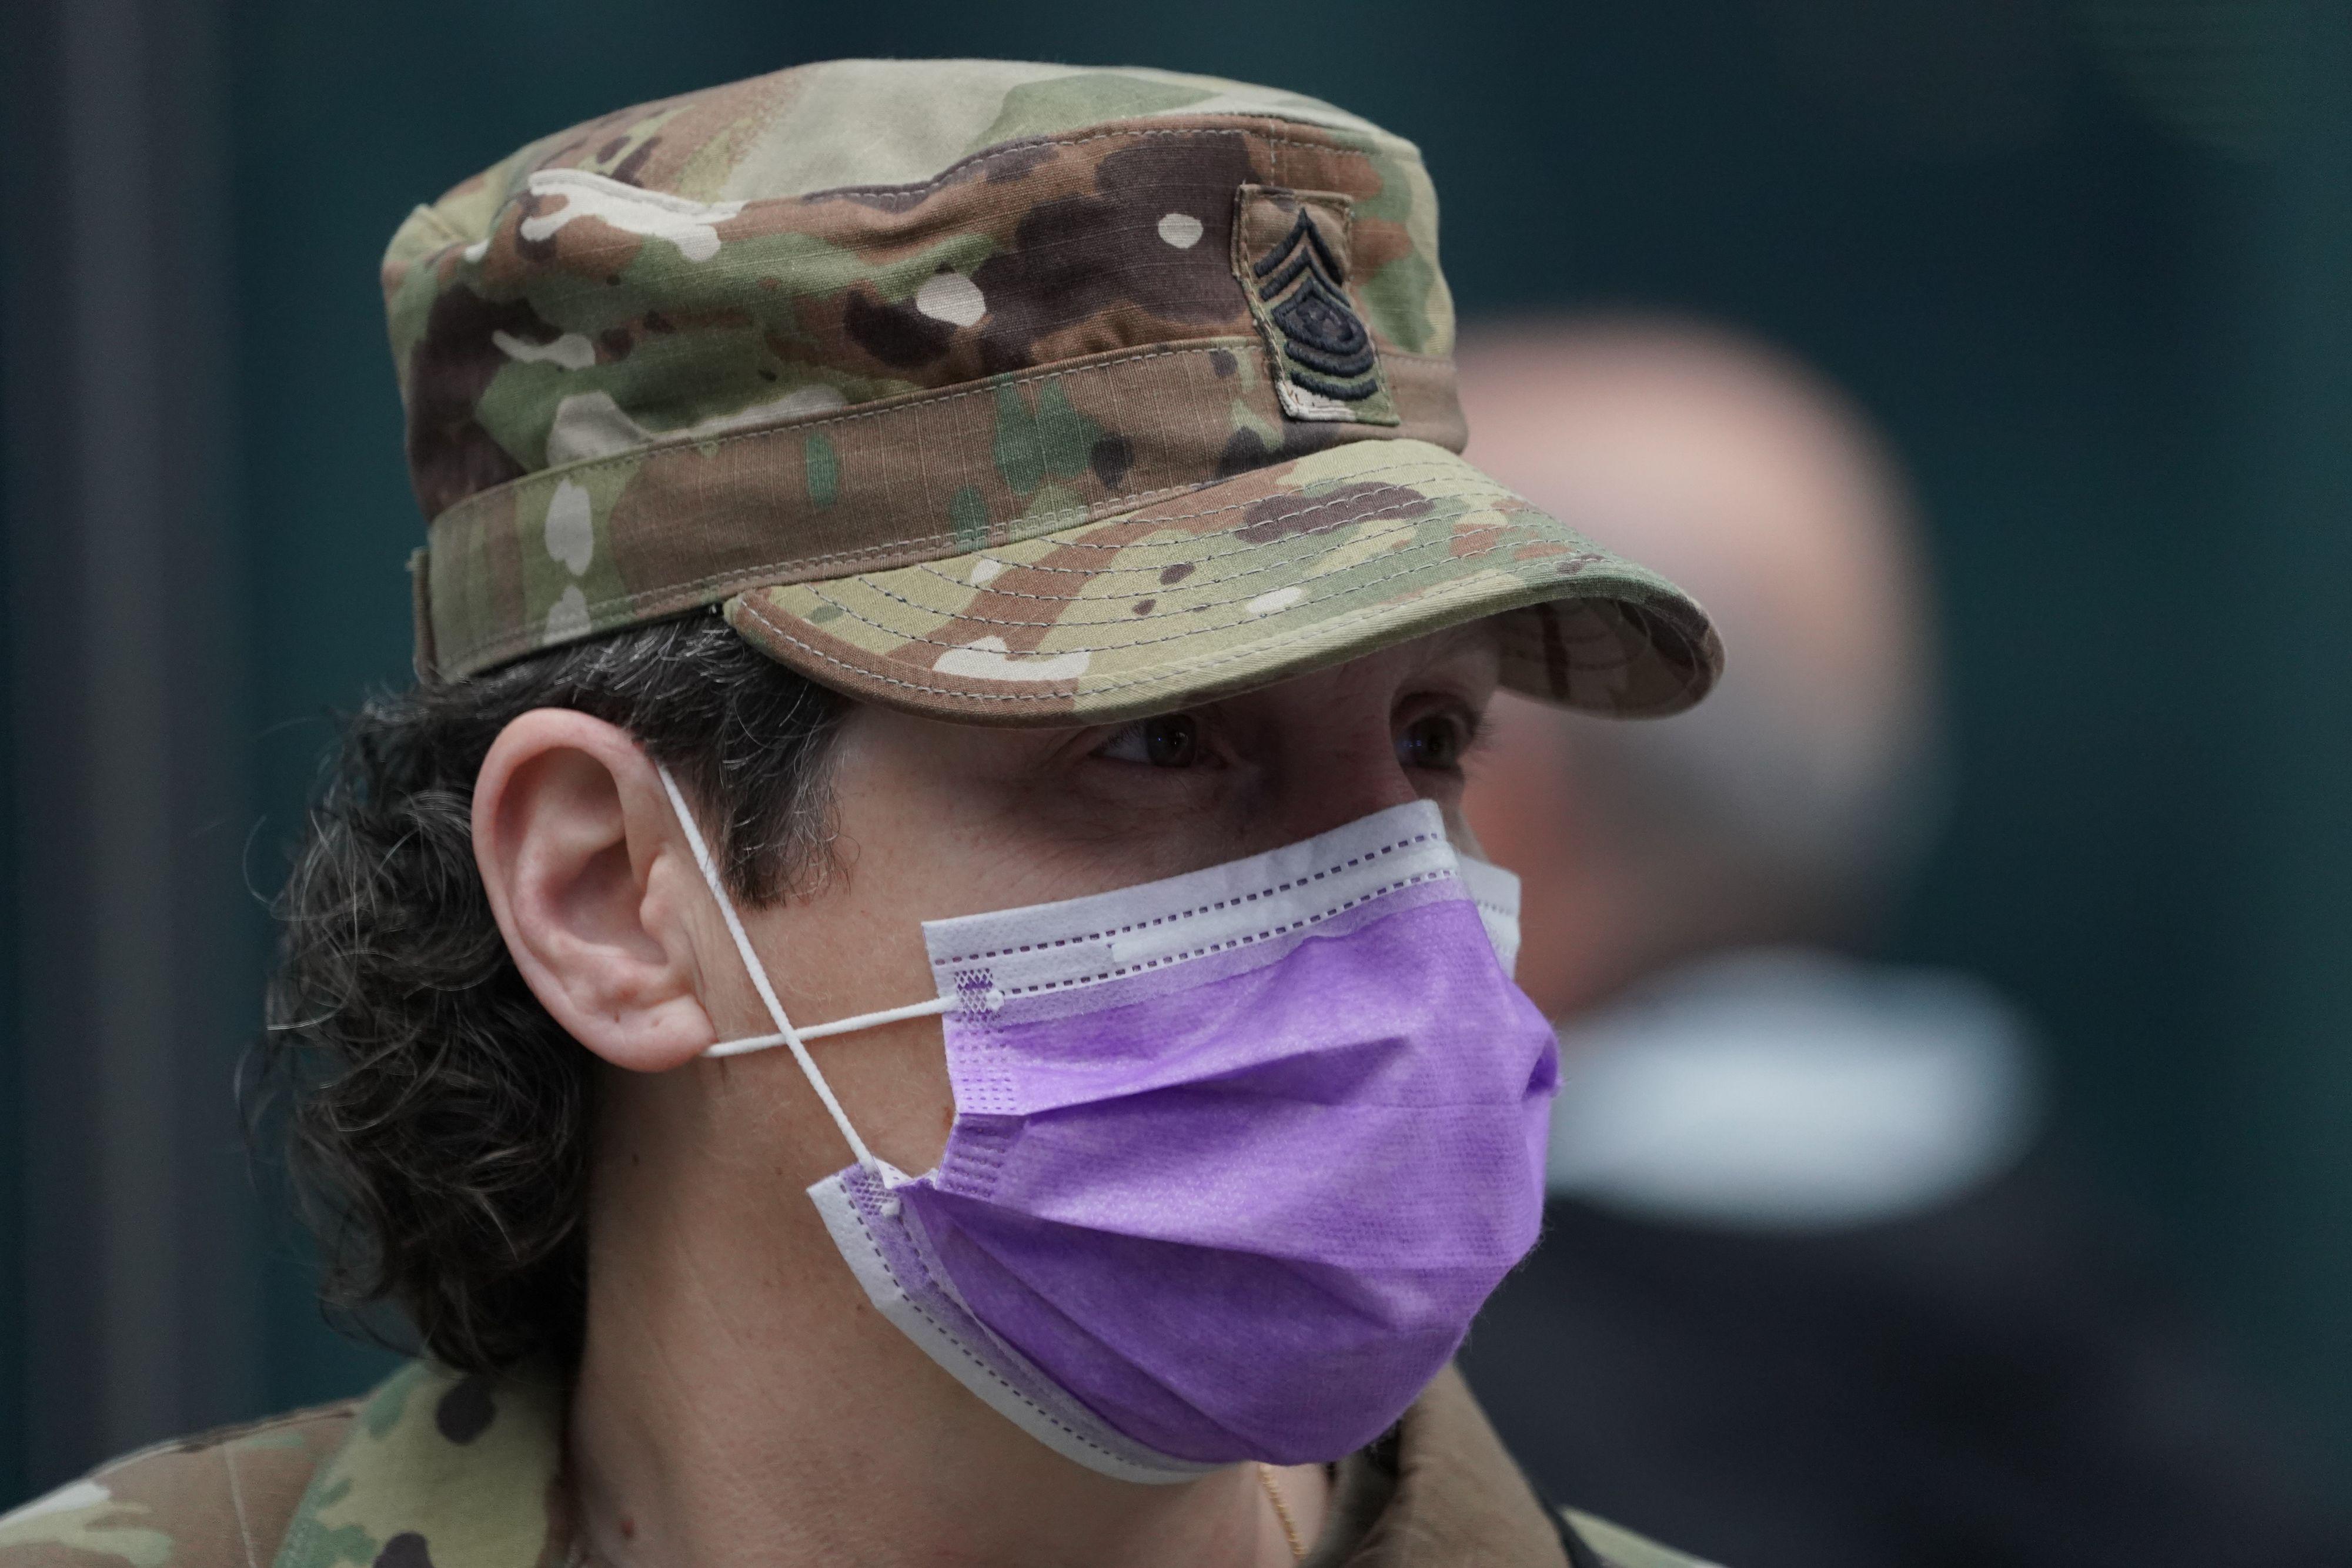 U.S. National Guard soldier wearing a purple facemask.